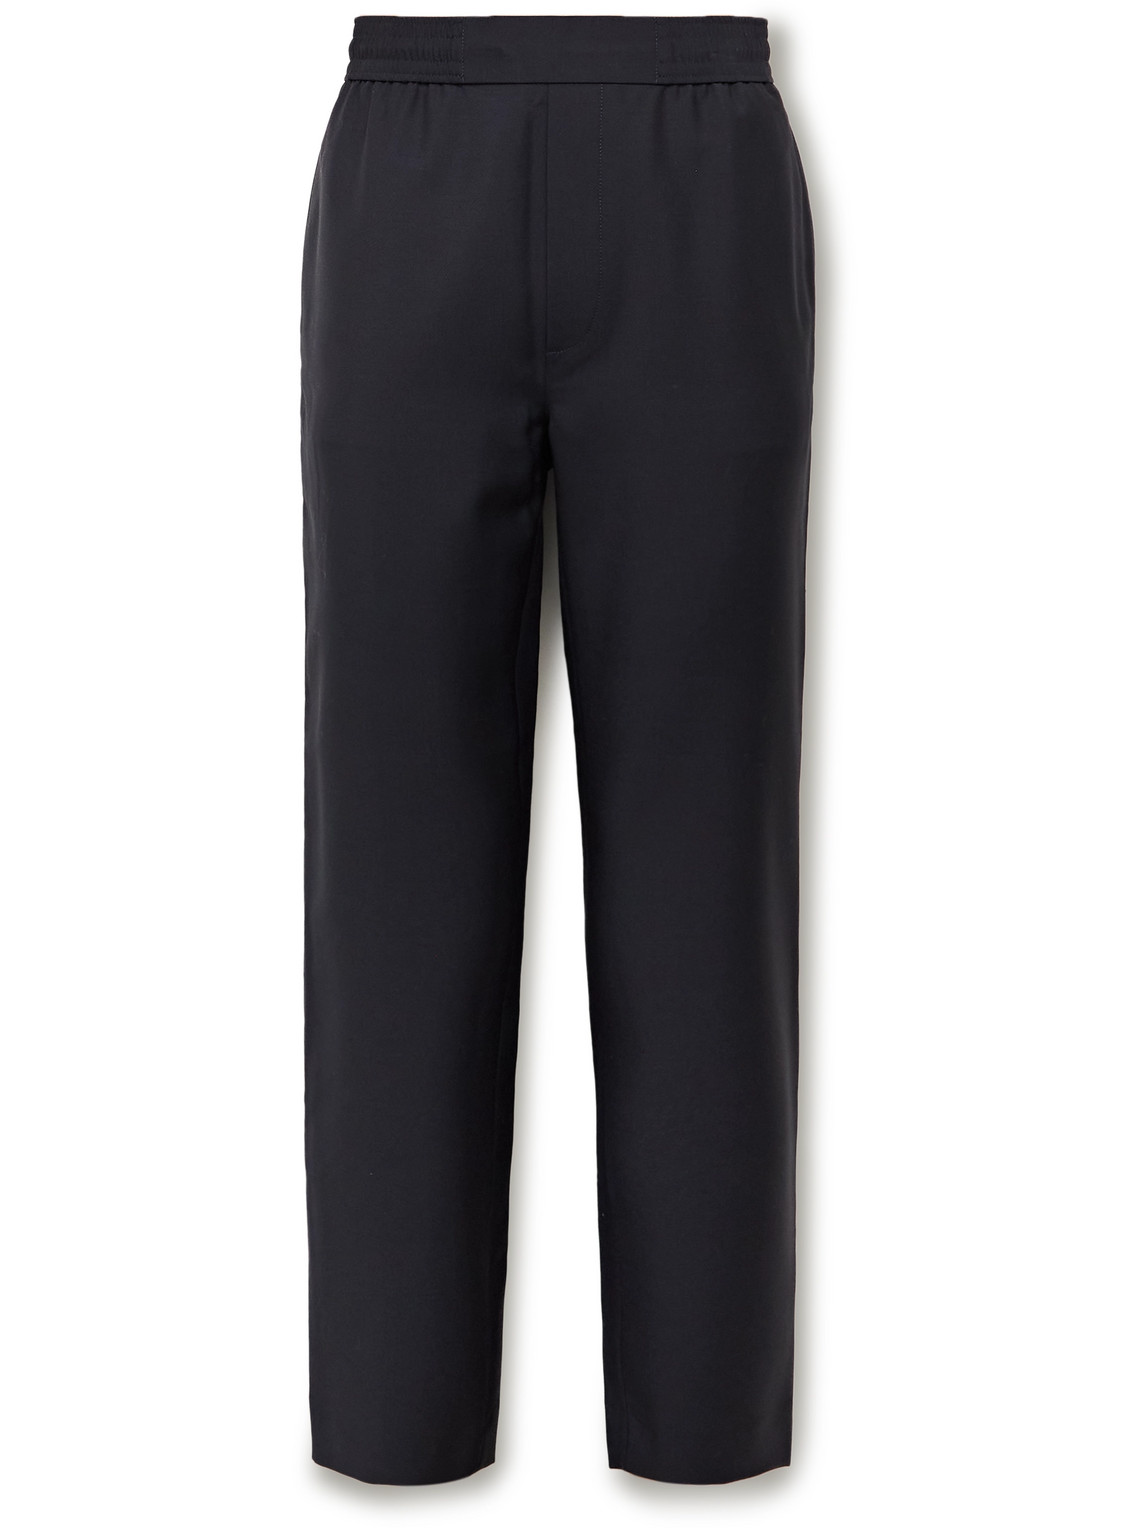 Acne Studios Pismo Wool and Mohair-Blend Trousers